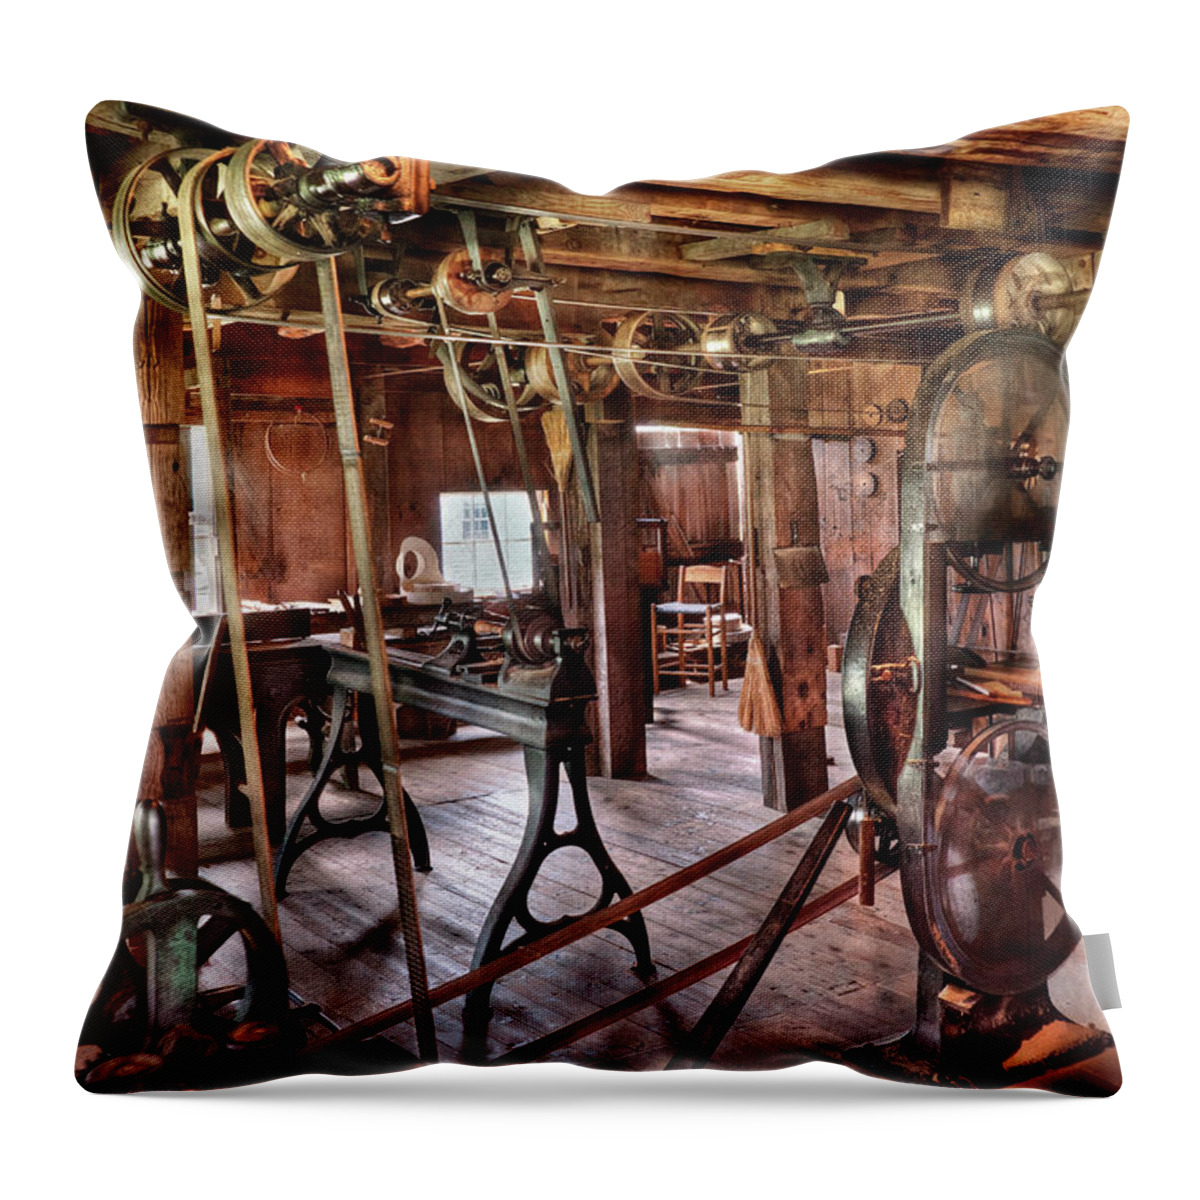 Quaint Throw Pillow featuring the photograph Carpenter - This old shop by Mike Savad